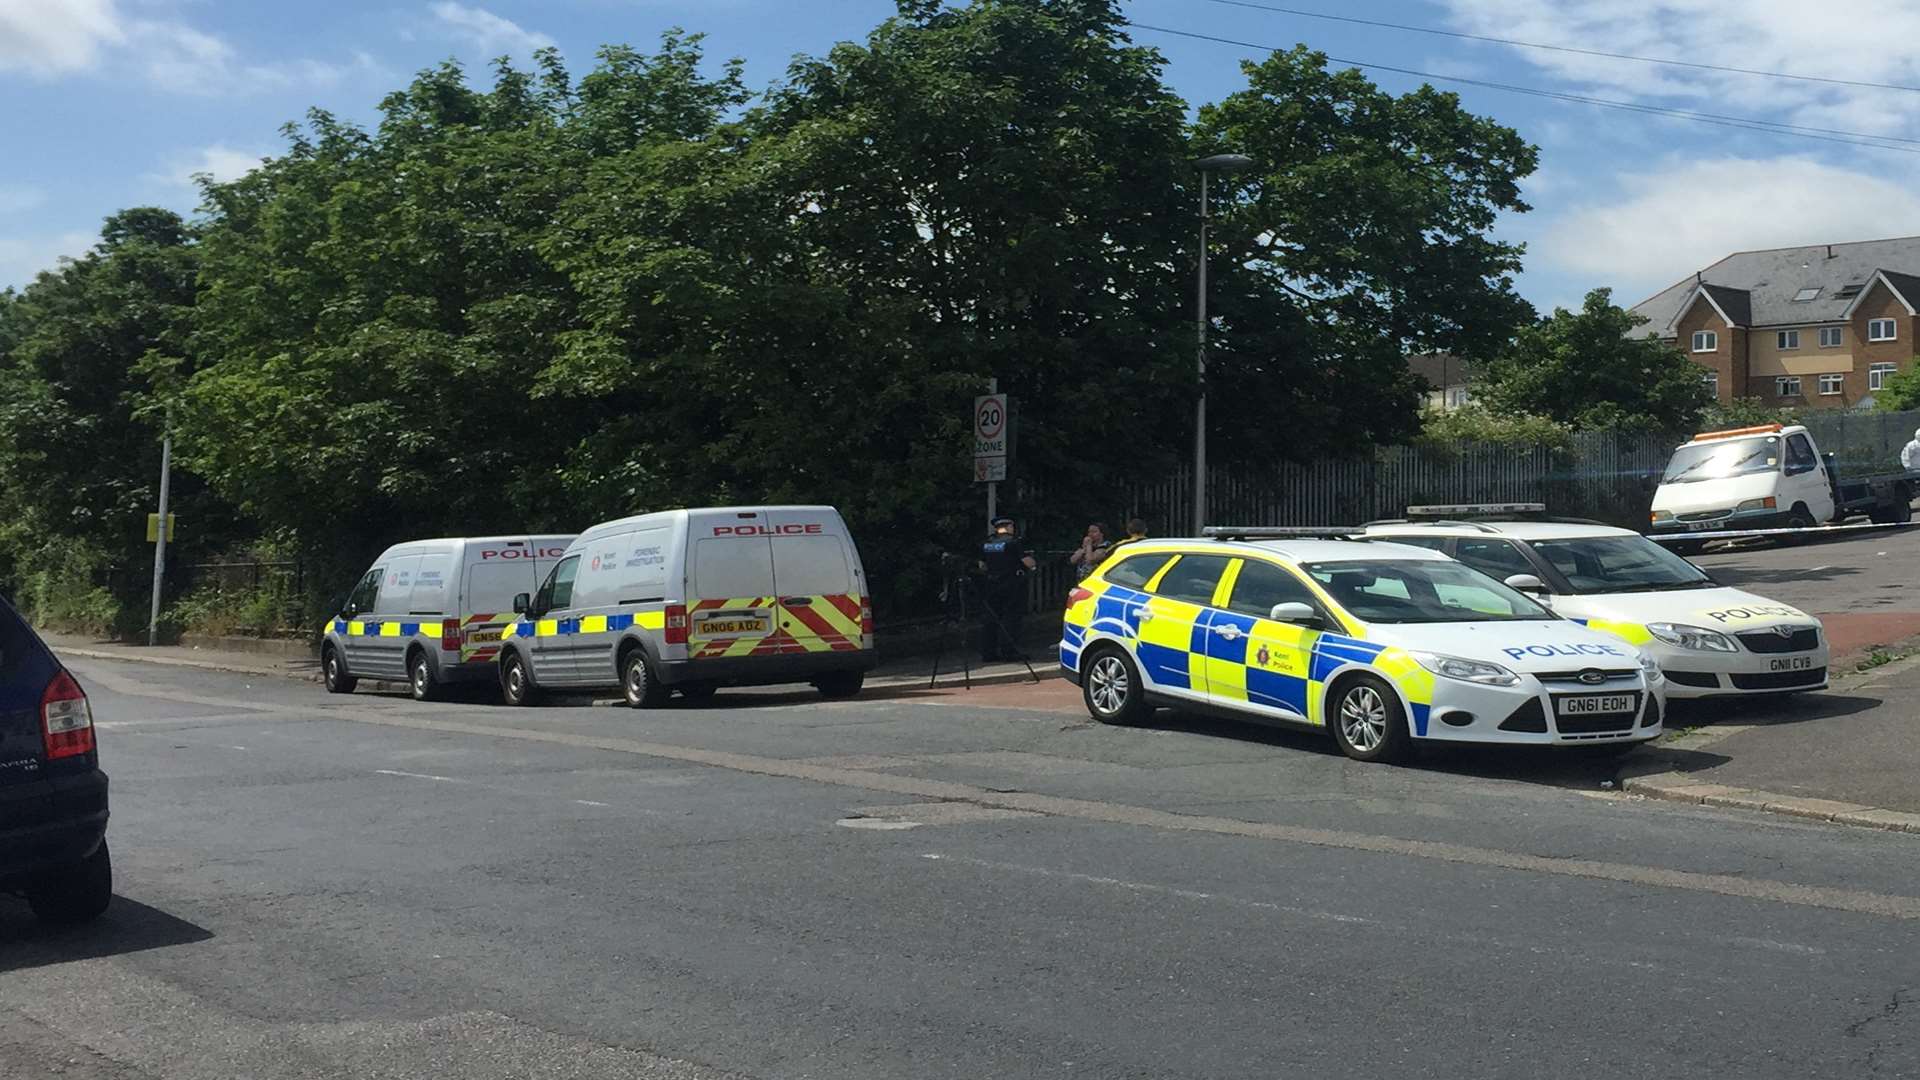 Police vehicles near the scene of the crime